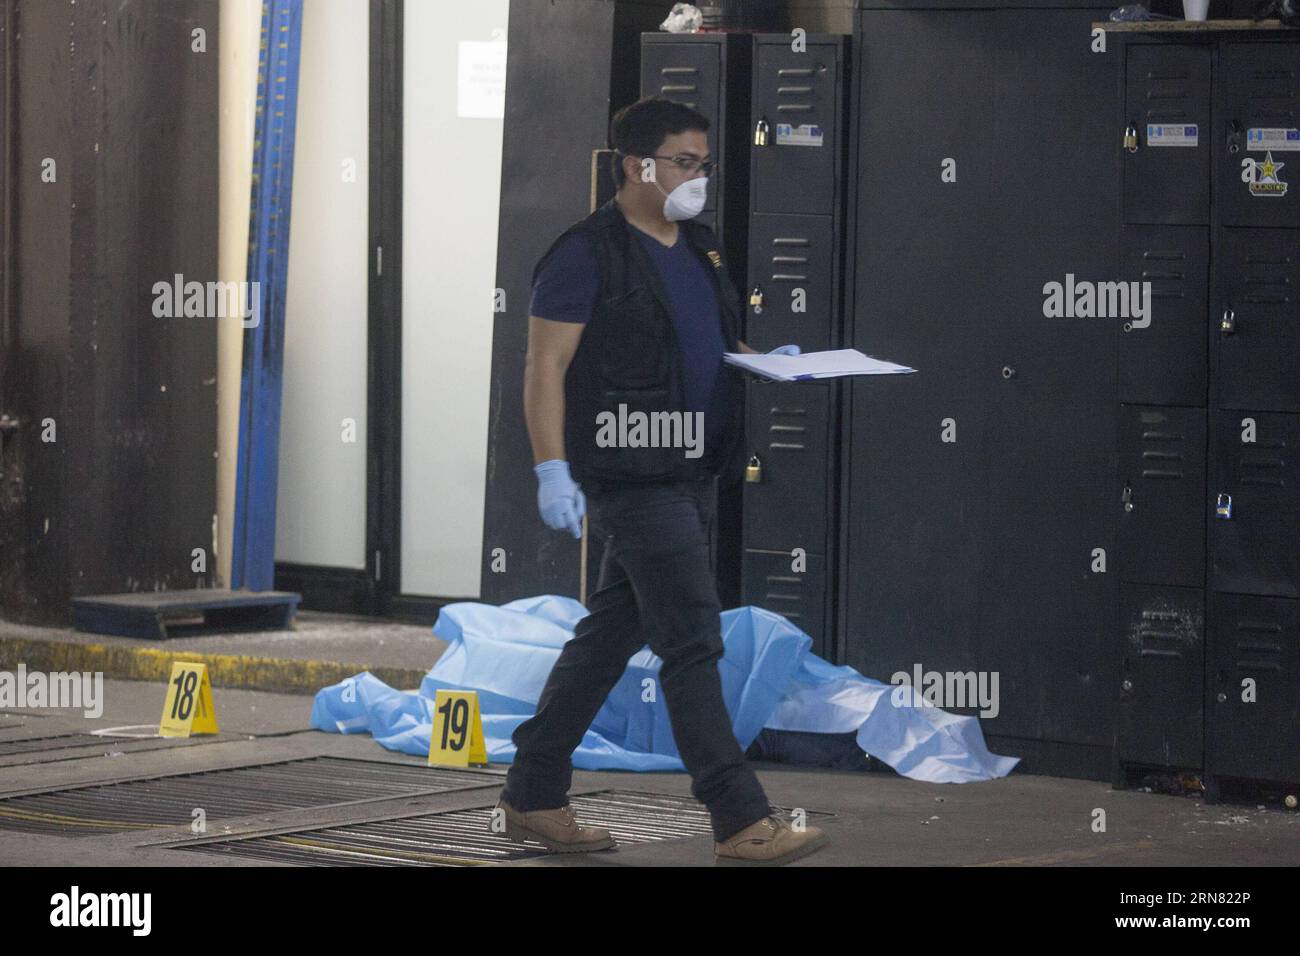 (150930) -- GUATEMALA CITY, Sept. 30, 2015 -- A prosecutor from Public Prosecutor s Office investigates in the Tower of Courts, in Guatemala City, capital of Guatemala, Sept. 30, 2015. A gang member was killed and two others wounded by rival gangsters of Barrio 18 and Mara Salvatrucha while they were held under custody in the Tower of Courts basement, located in the Civic Center of the Guatemalan capital, according to local press information.Luis Echeverria) (jg) (sp) GUATEMALA-GUATEMALA CITY-VIOLENCE e LuisxEcheverria PUBLICATIONxNOTxINxCHN   Guatemala City Sept 30 2015 a Prosecutor from Publ Stock Photo